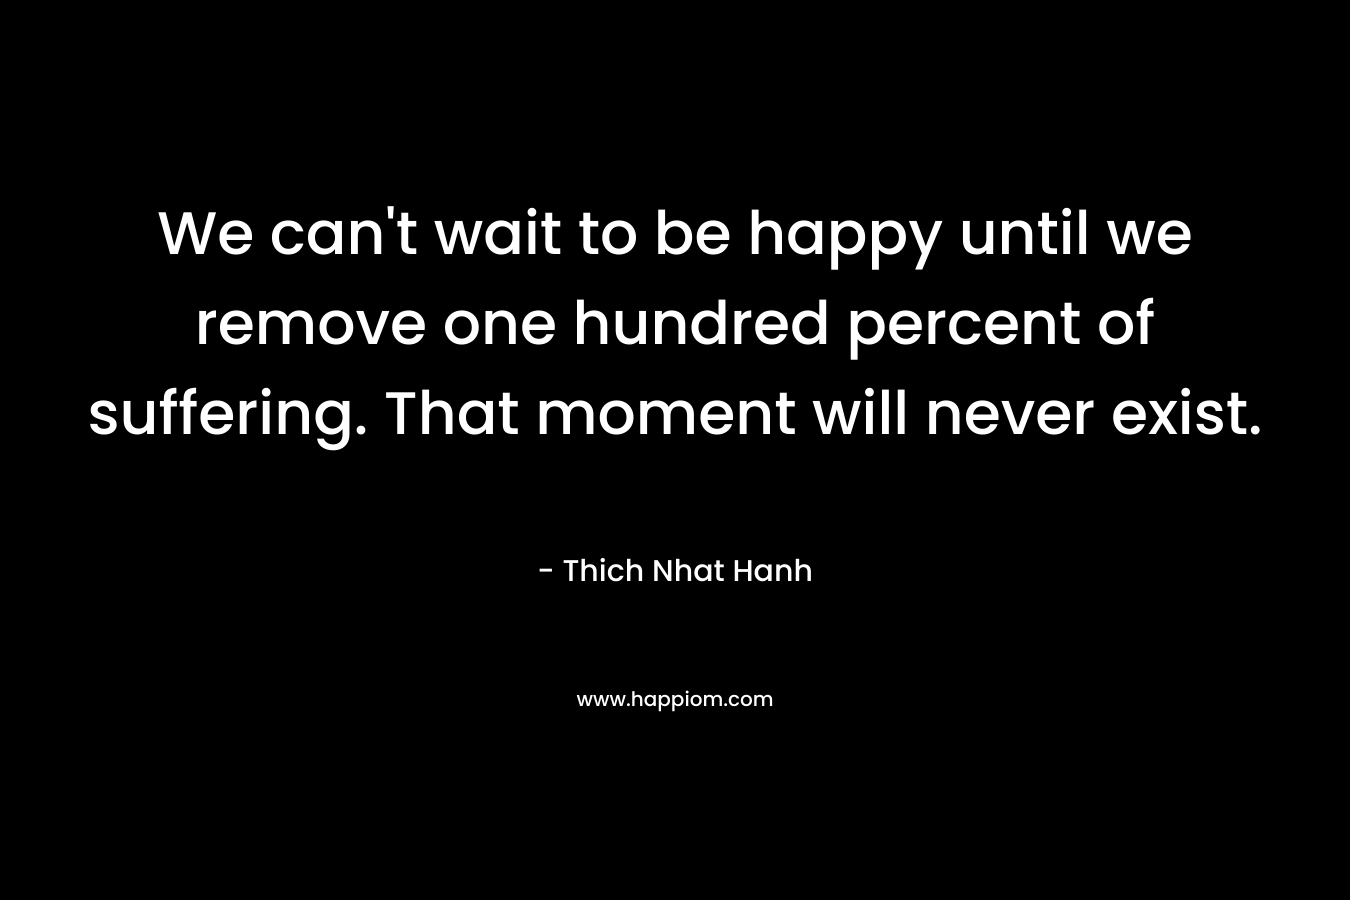 We can’t wait to be happy until we remove one hundred percent of suffering. That moment will never exist. – Thich Nhat Hanh